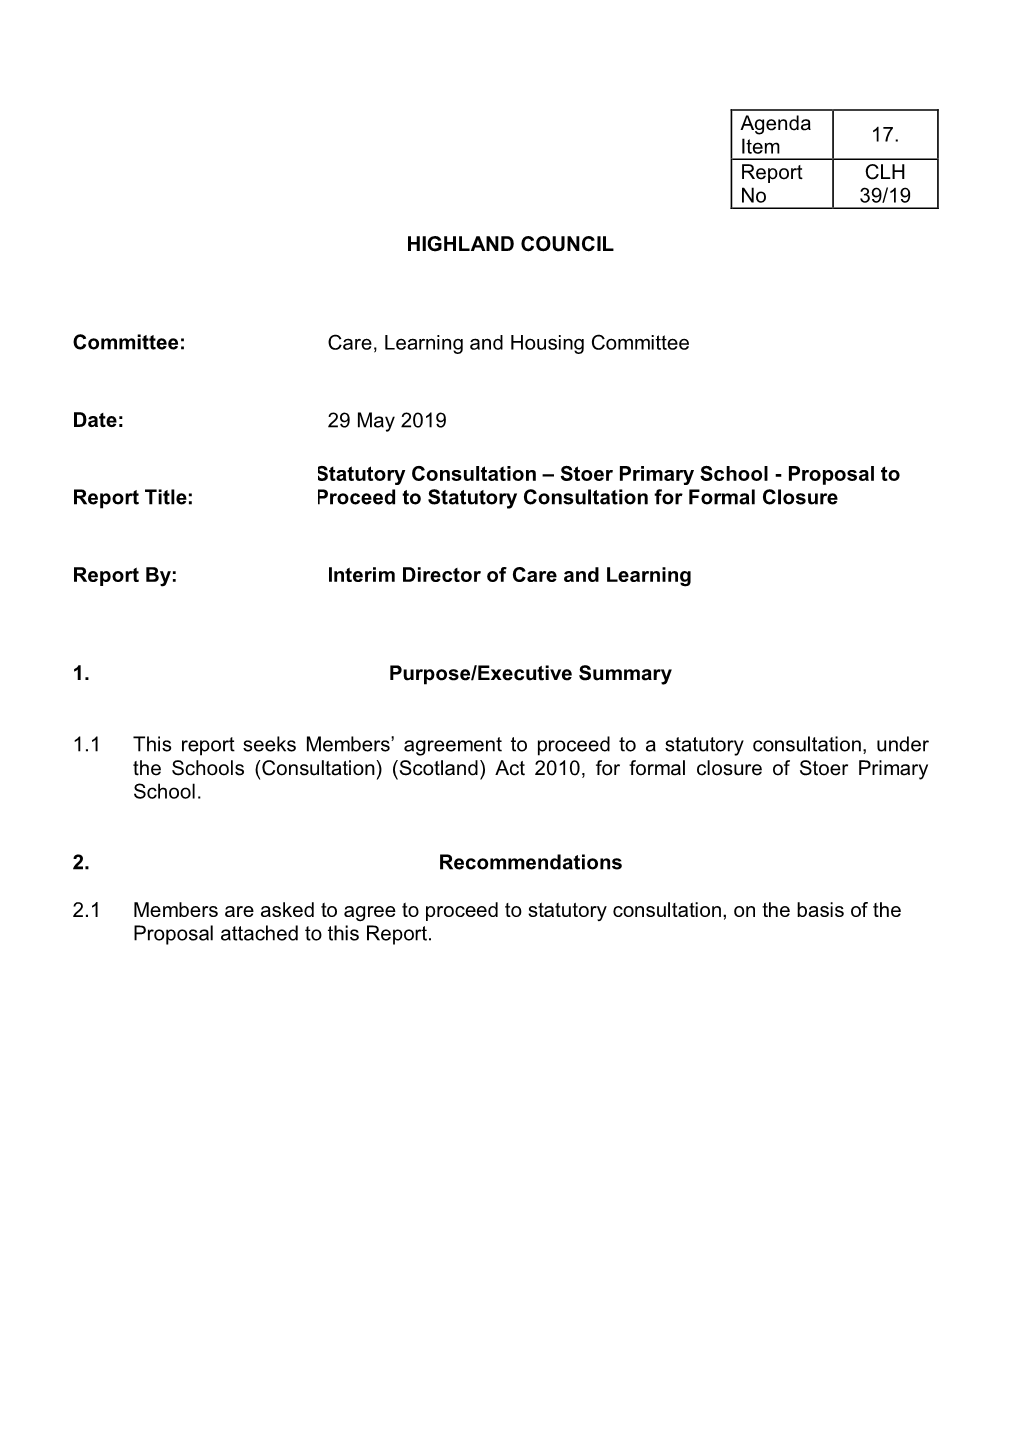 Stoer Primary School - Proposal to Report Title: Proceed to Statutory Consultation for Formal Closure